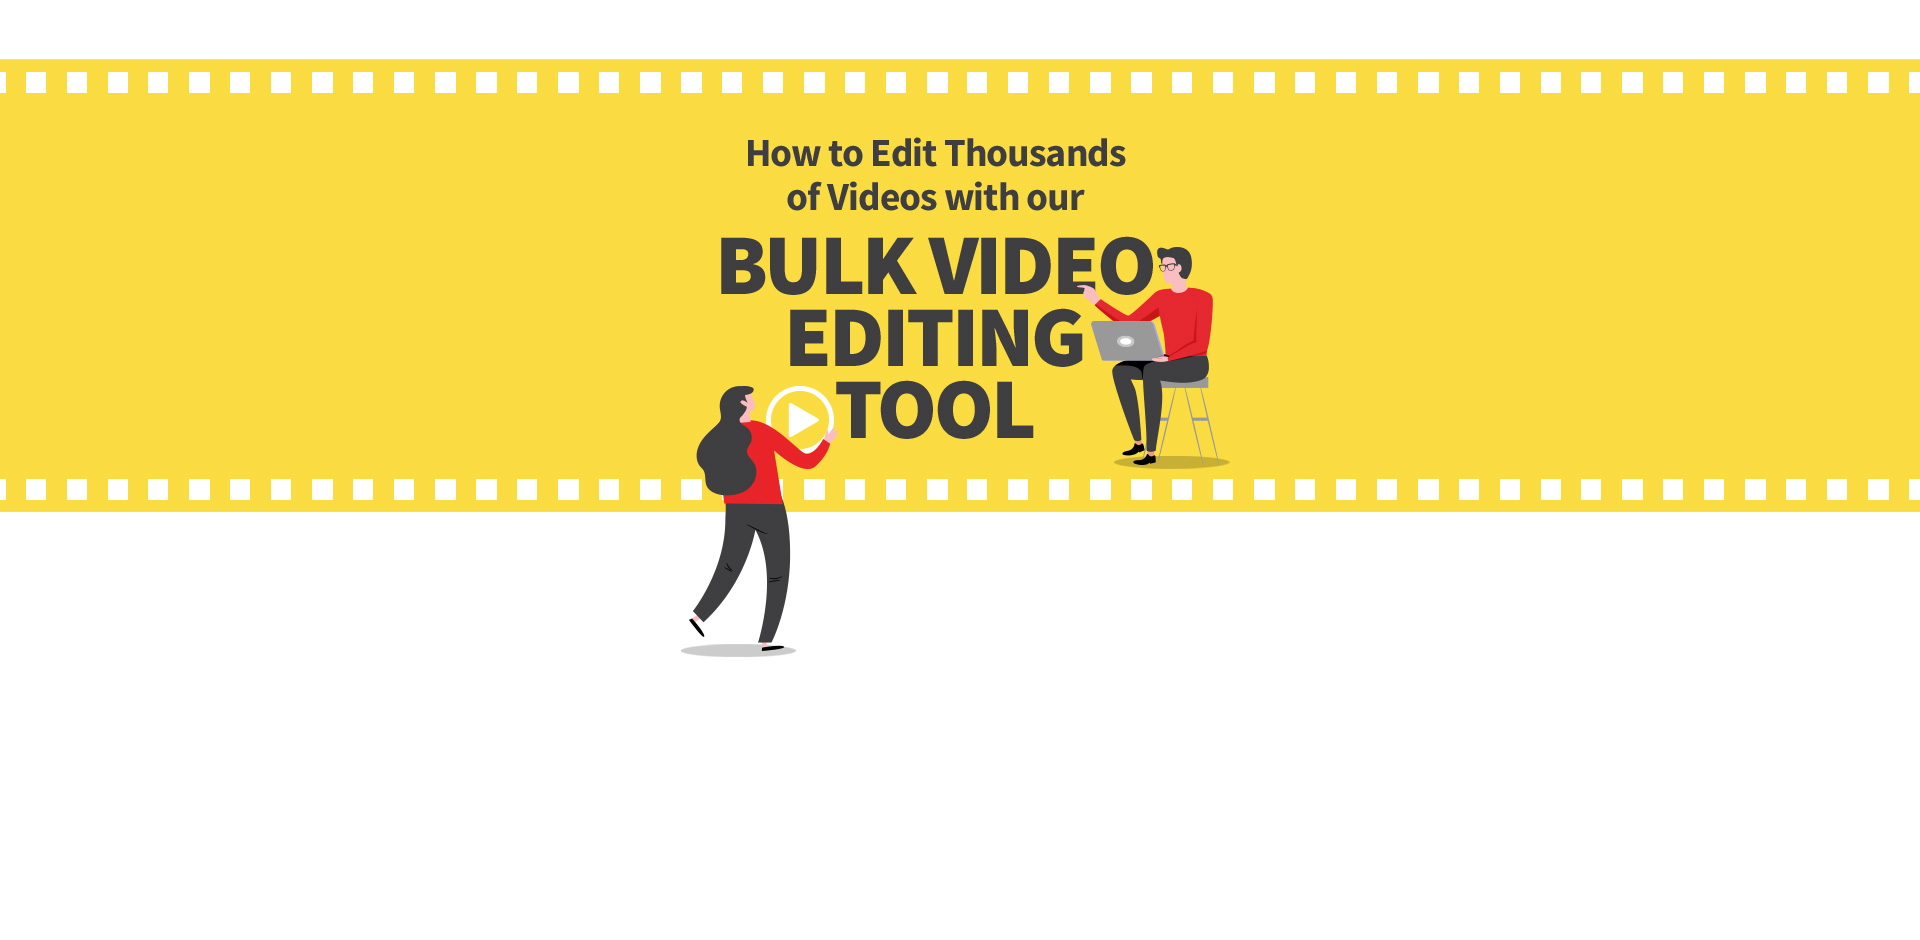 How to Edit Thousands of Videos with Our Bulk Video Editing Tool